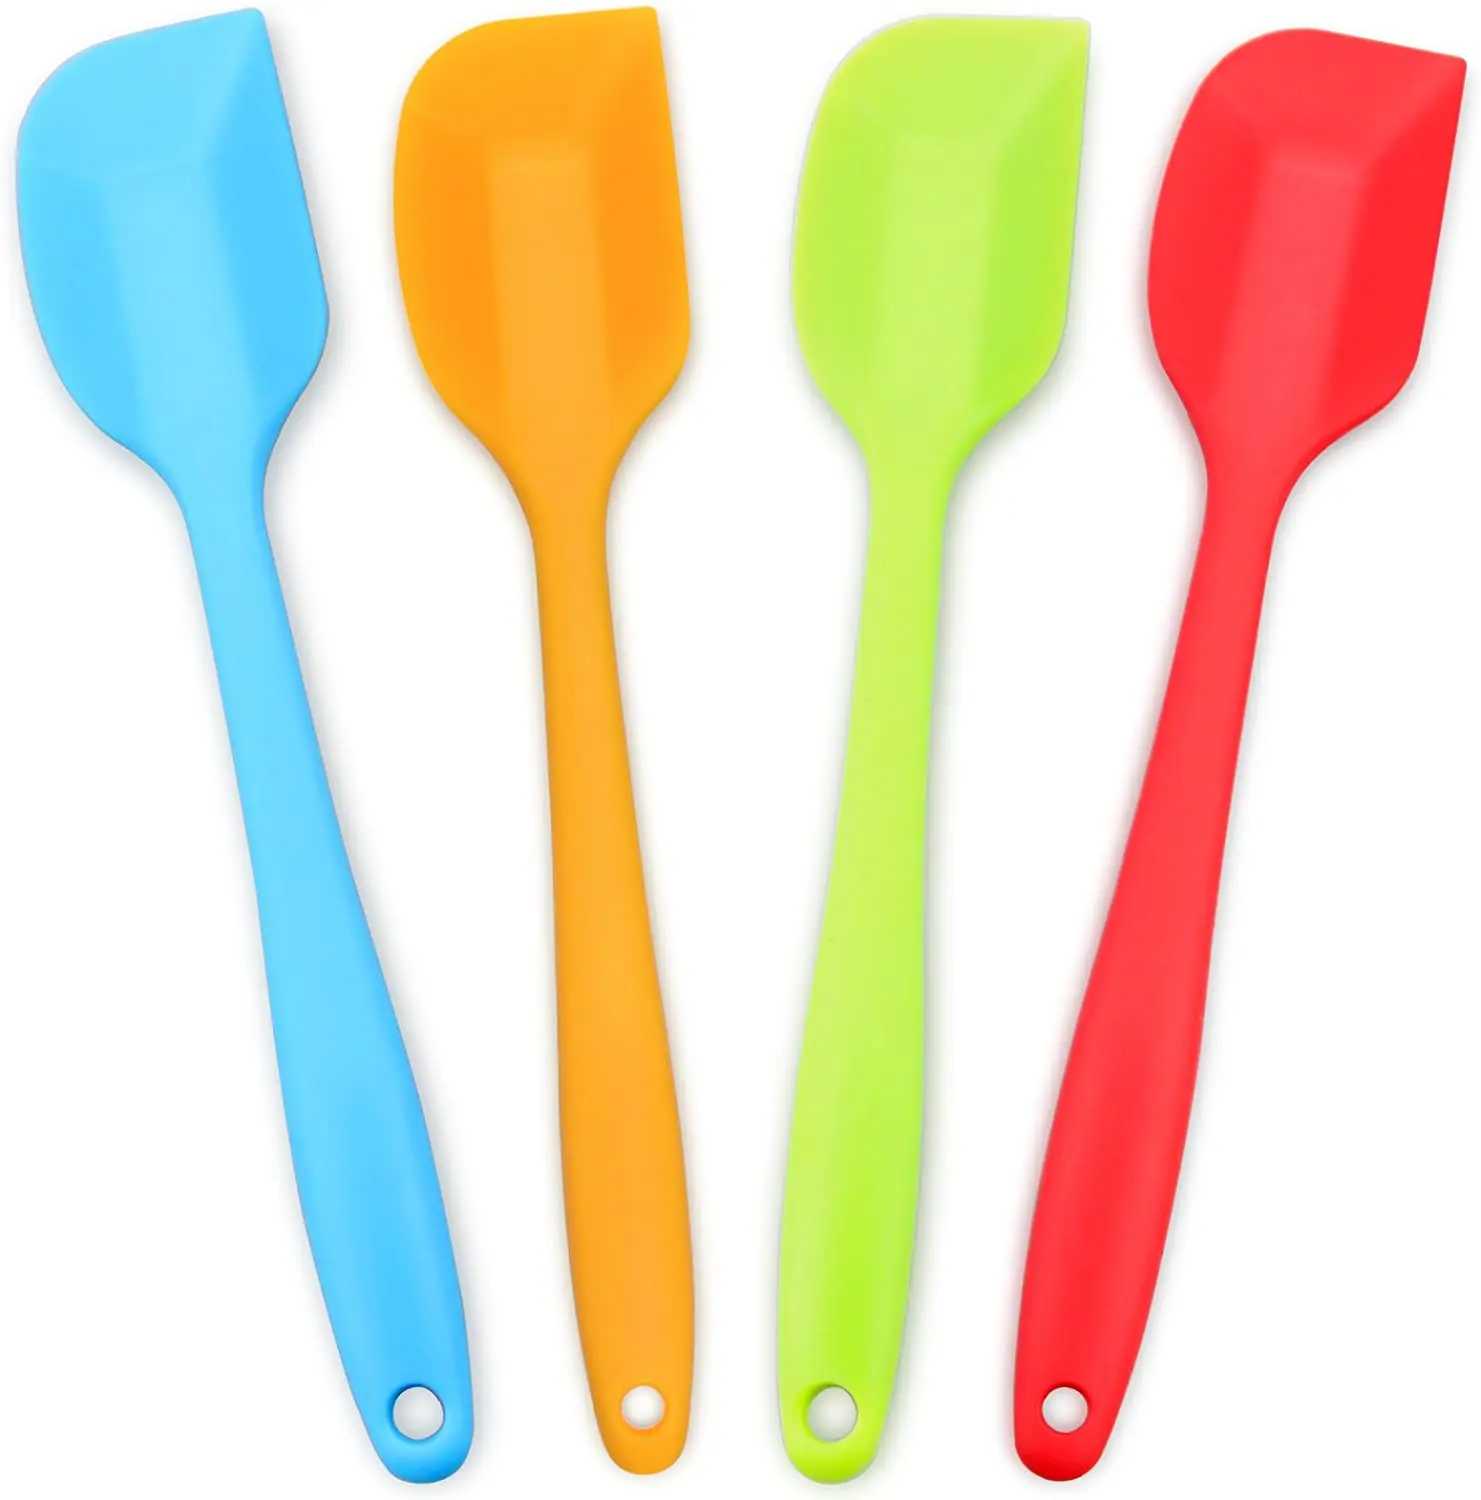 

Heat Resistant Kitchen Silicone Spatula Scraper For Cake Cream Pastry Butter Batter Mixing Cooking Baking